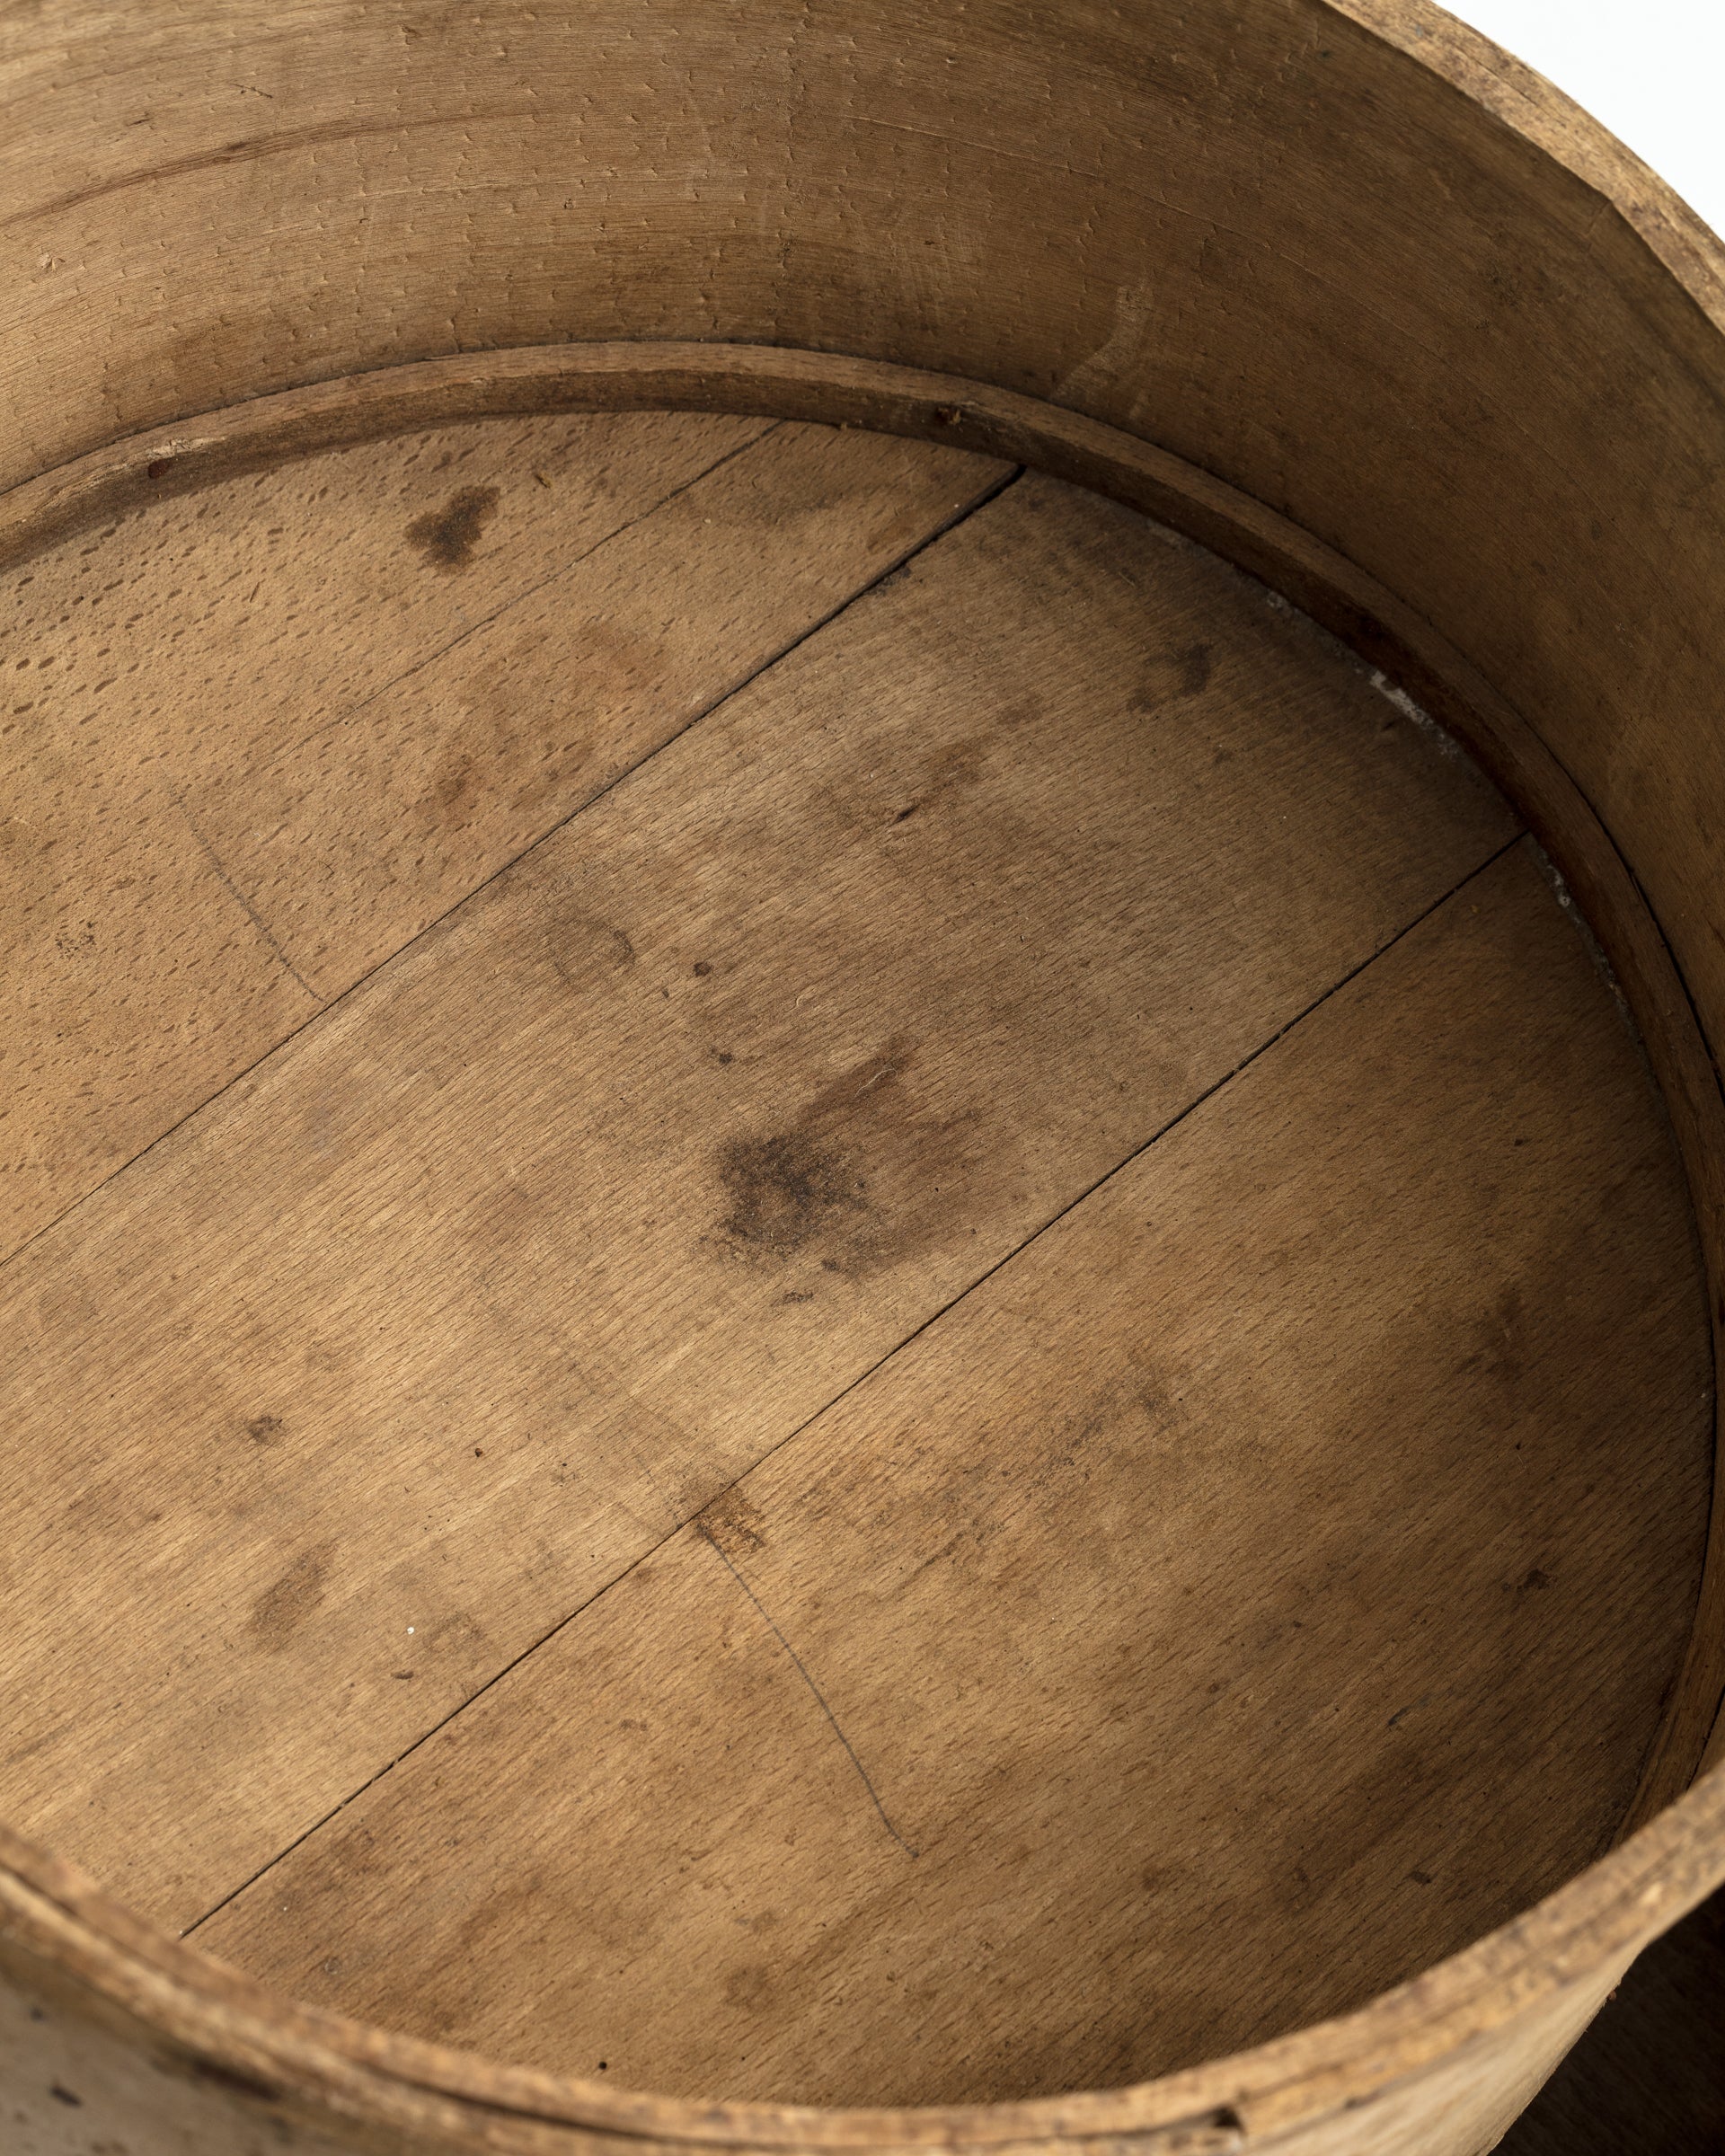 Close-up view of the interior of an old wooden barrel showing worn and stained wooden planks in a Scottsdale Arizona bungalow.